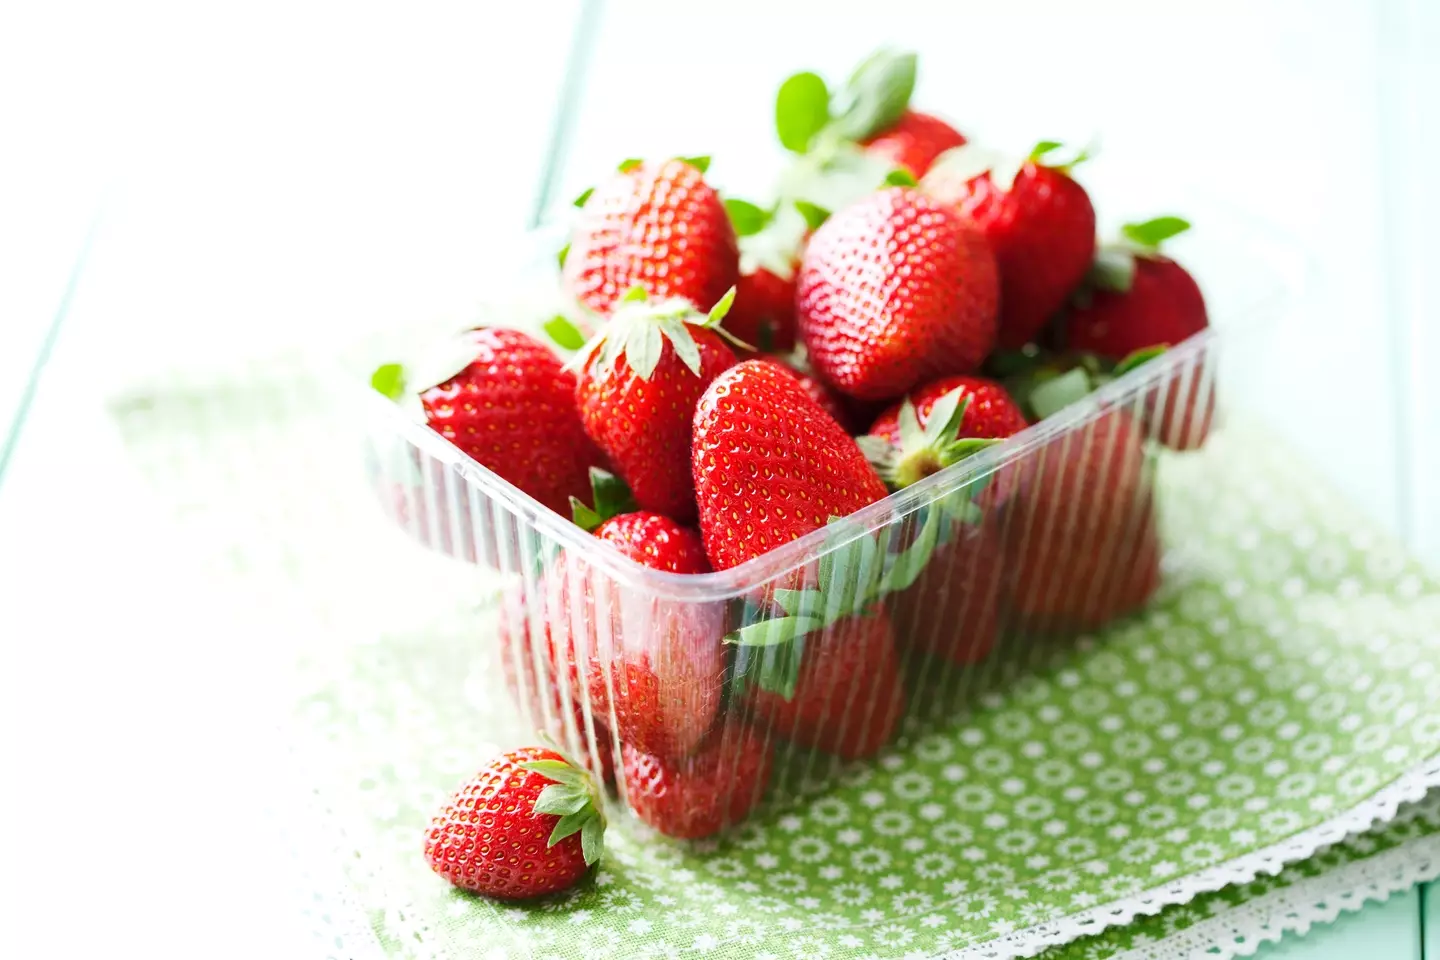 The FDA has confirmed it’s investigating a hepatitis A outbreak in strawberries.